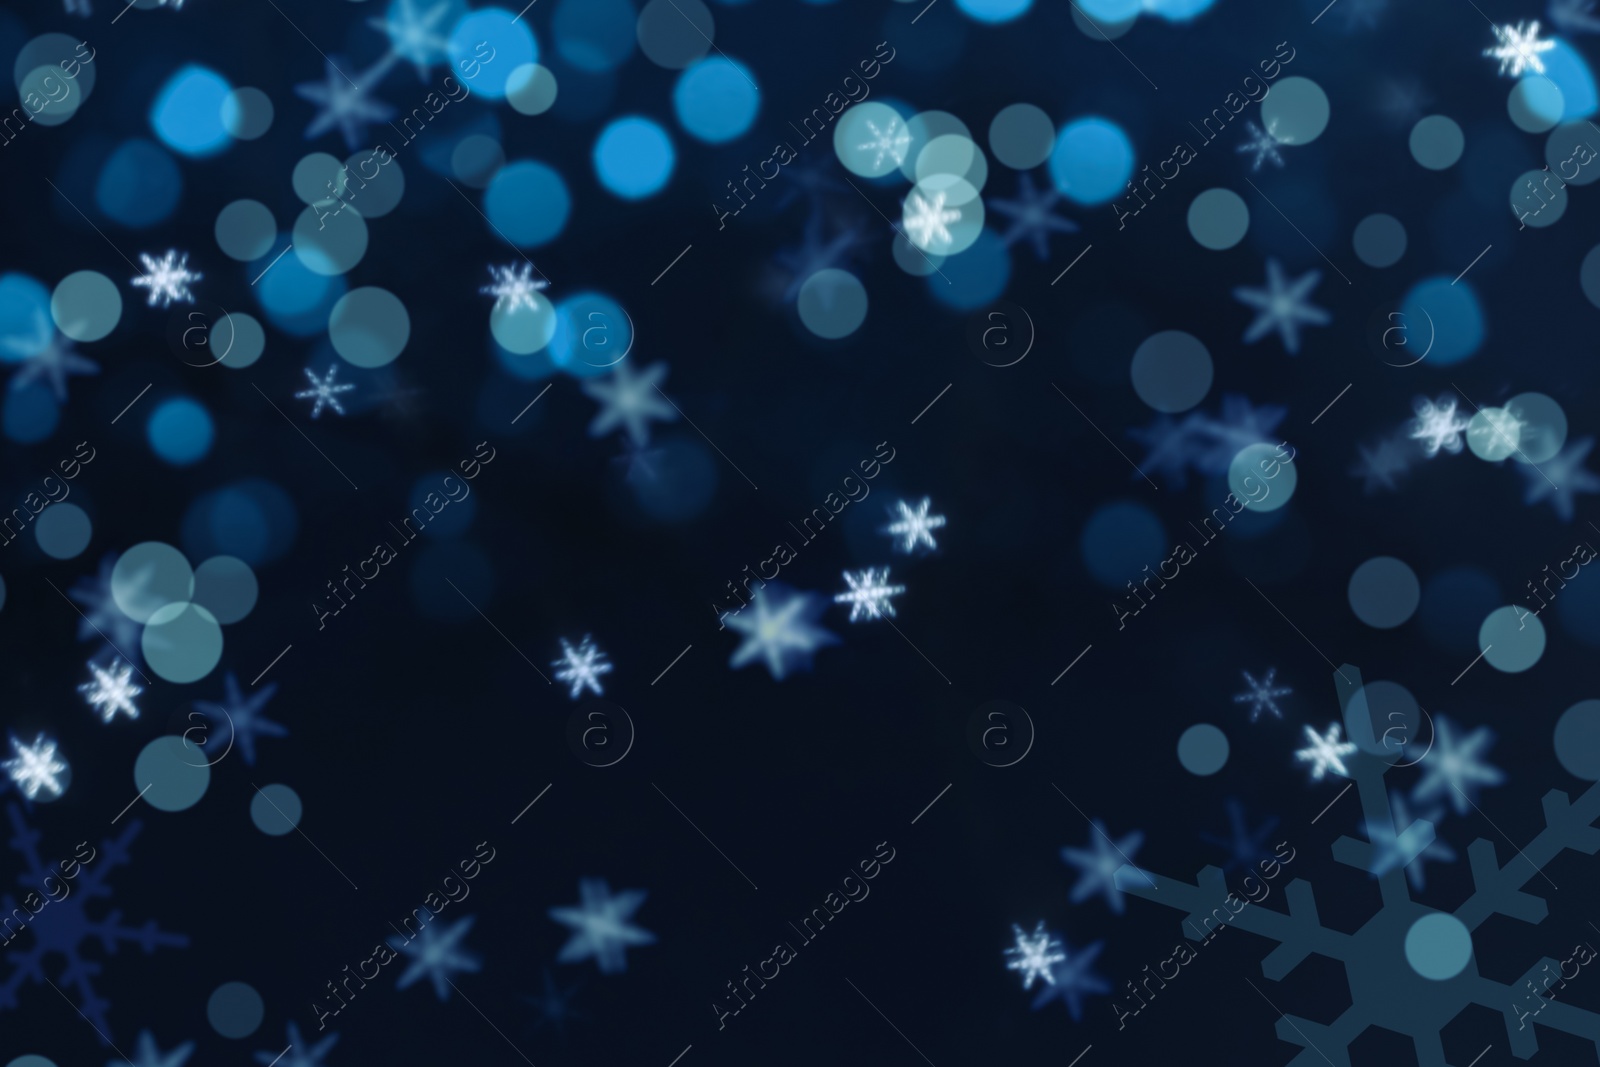 Image of Snowflakes and blurred lights on dark blue background